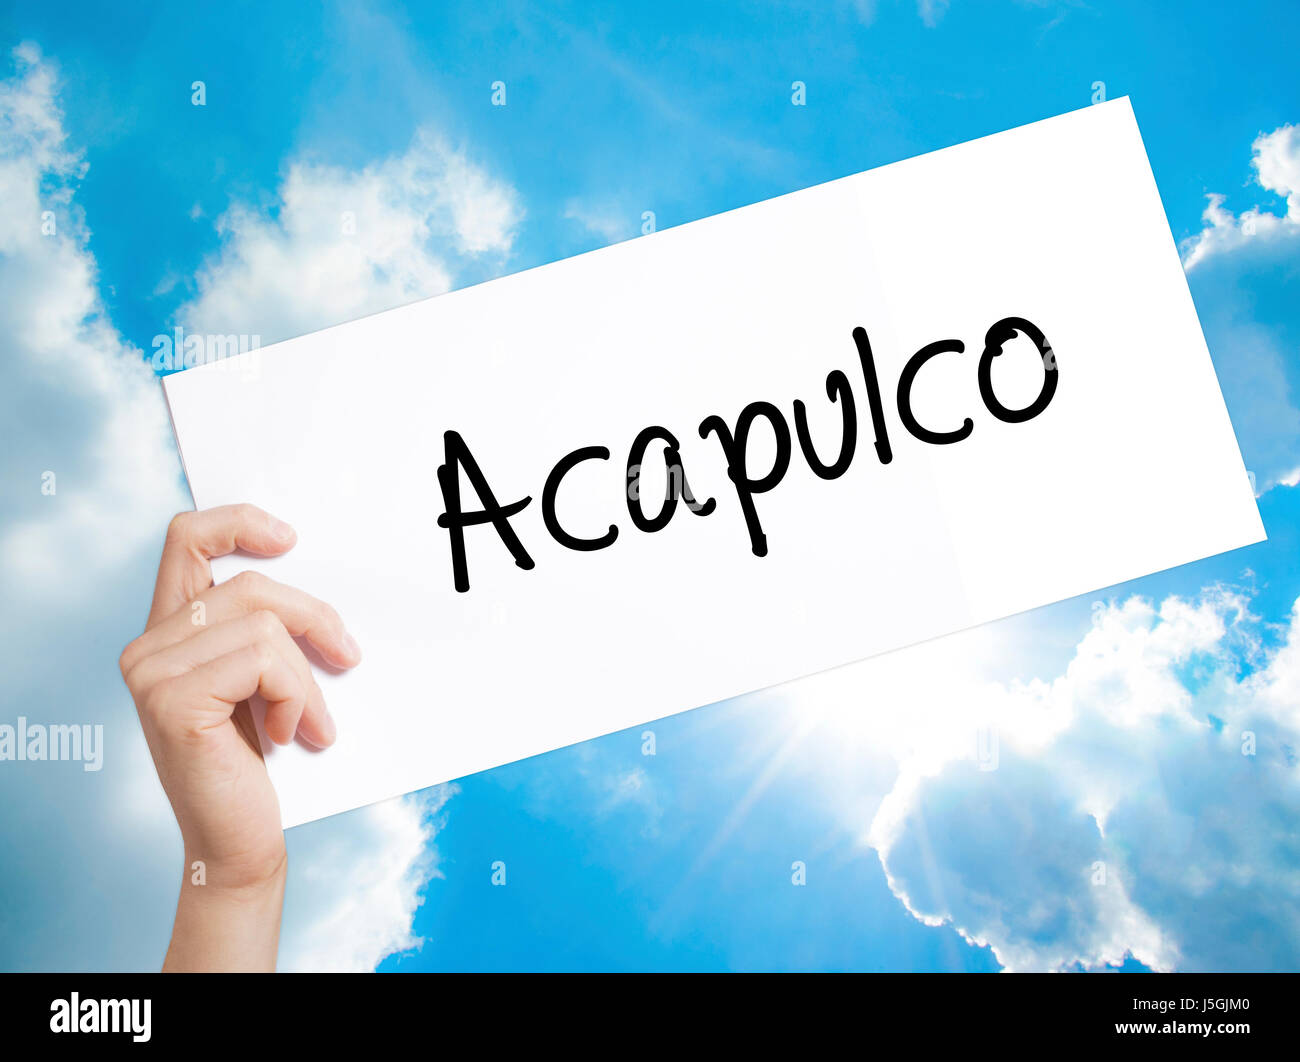 Acapulco  Sign on white paper. Man Hand Holding Paper with text. Isolated on sky background.  Business concept. Stock Photo Stock Photo